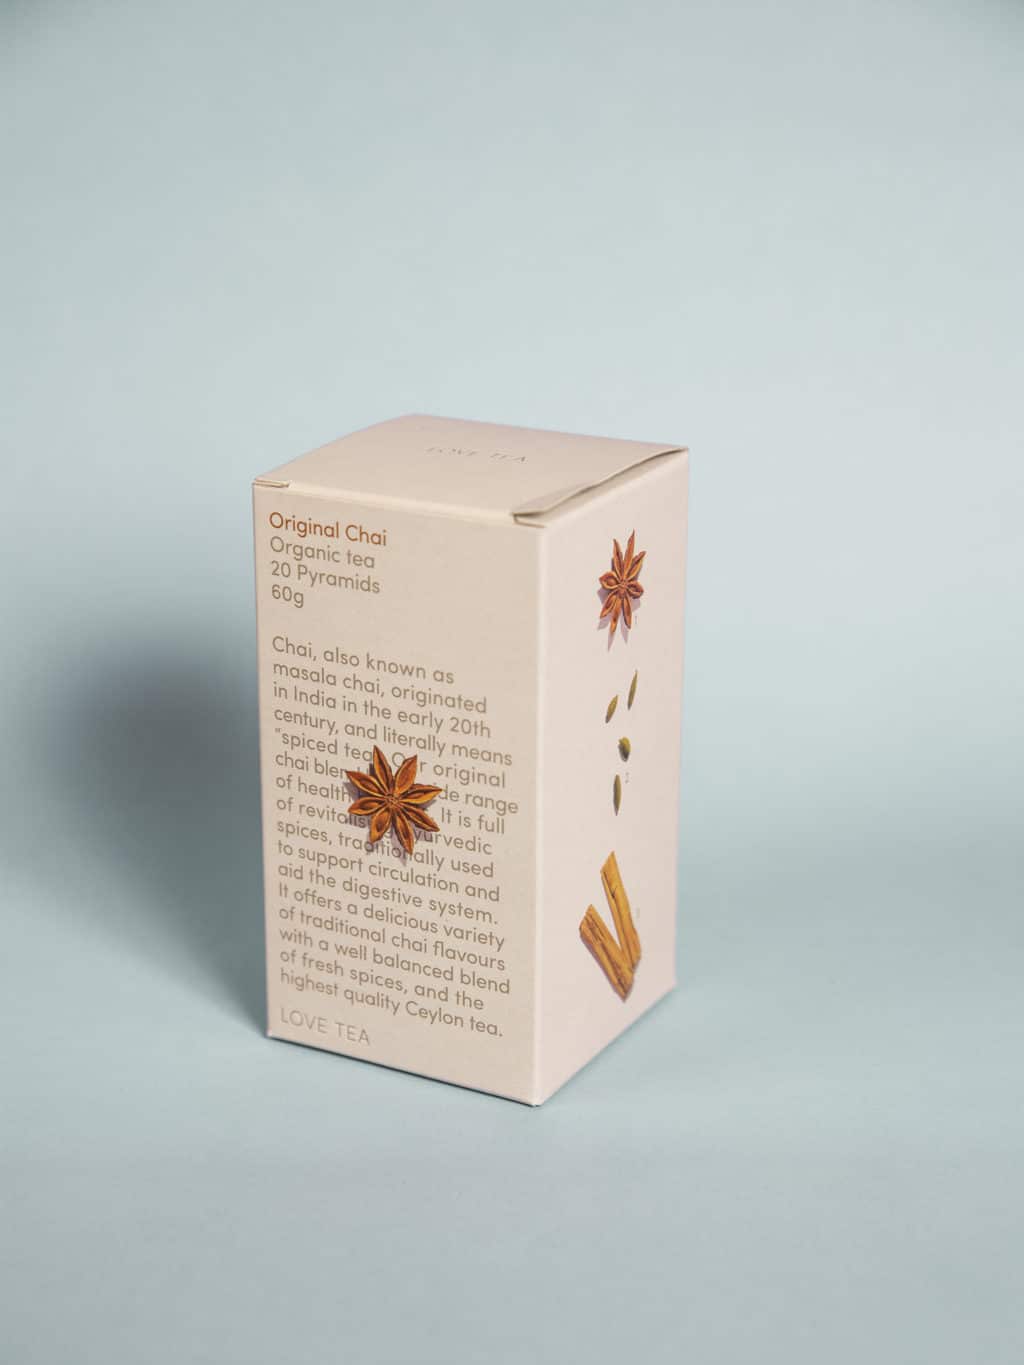 Organic Chai tea in a box. A beautiful gift at our boutique, Wagga Wagga florist shop.